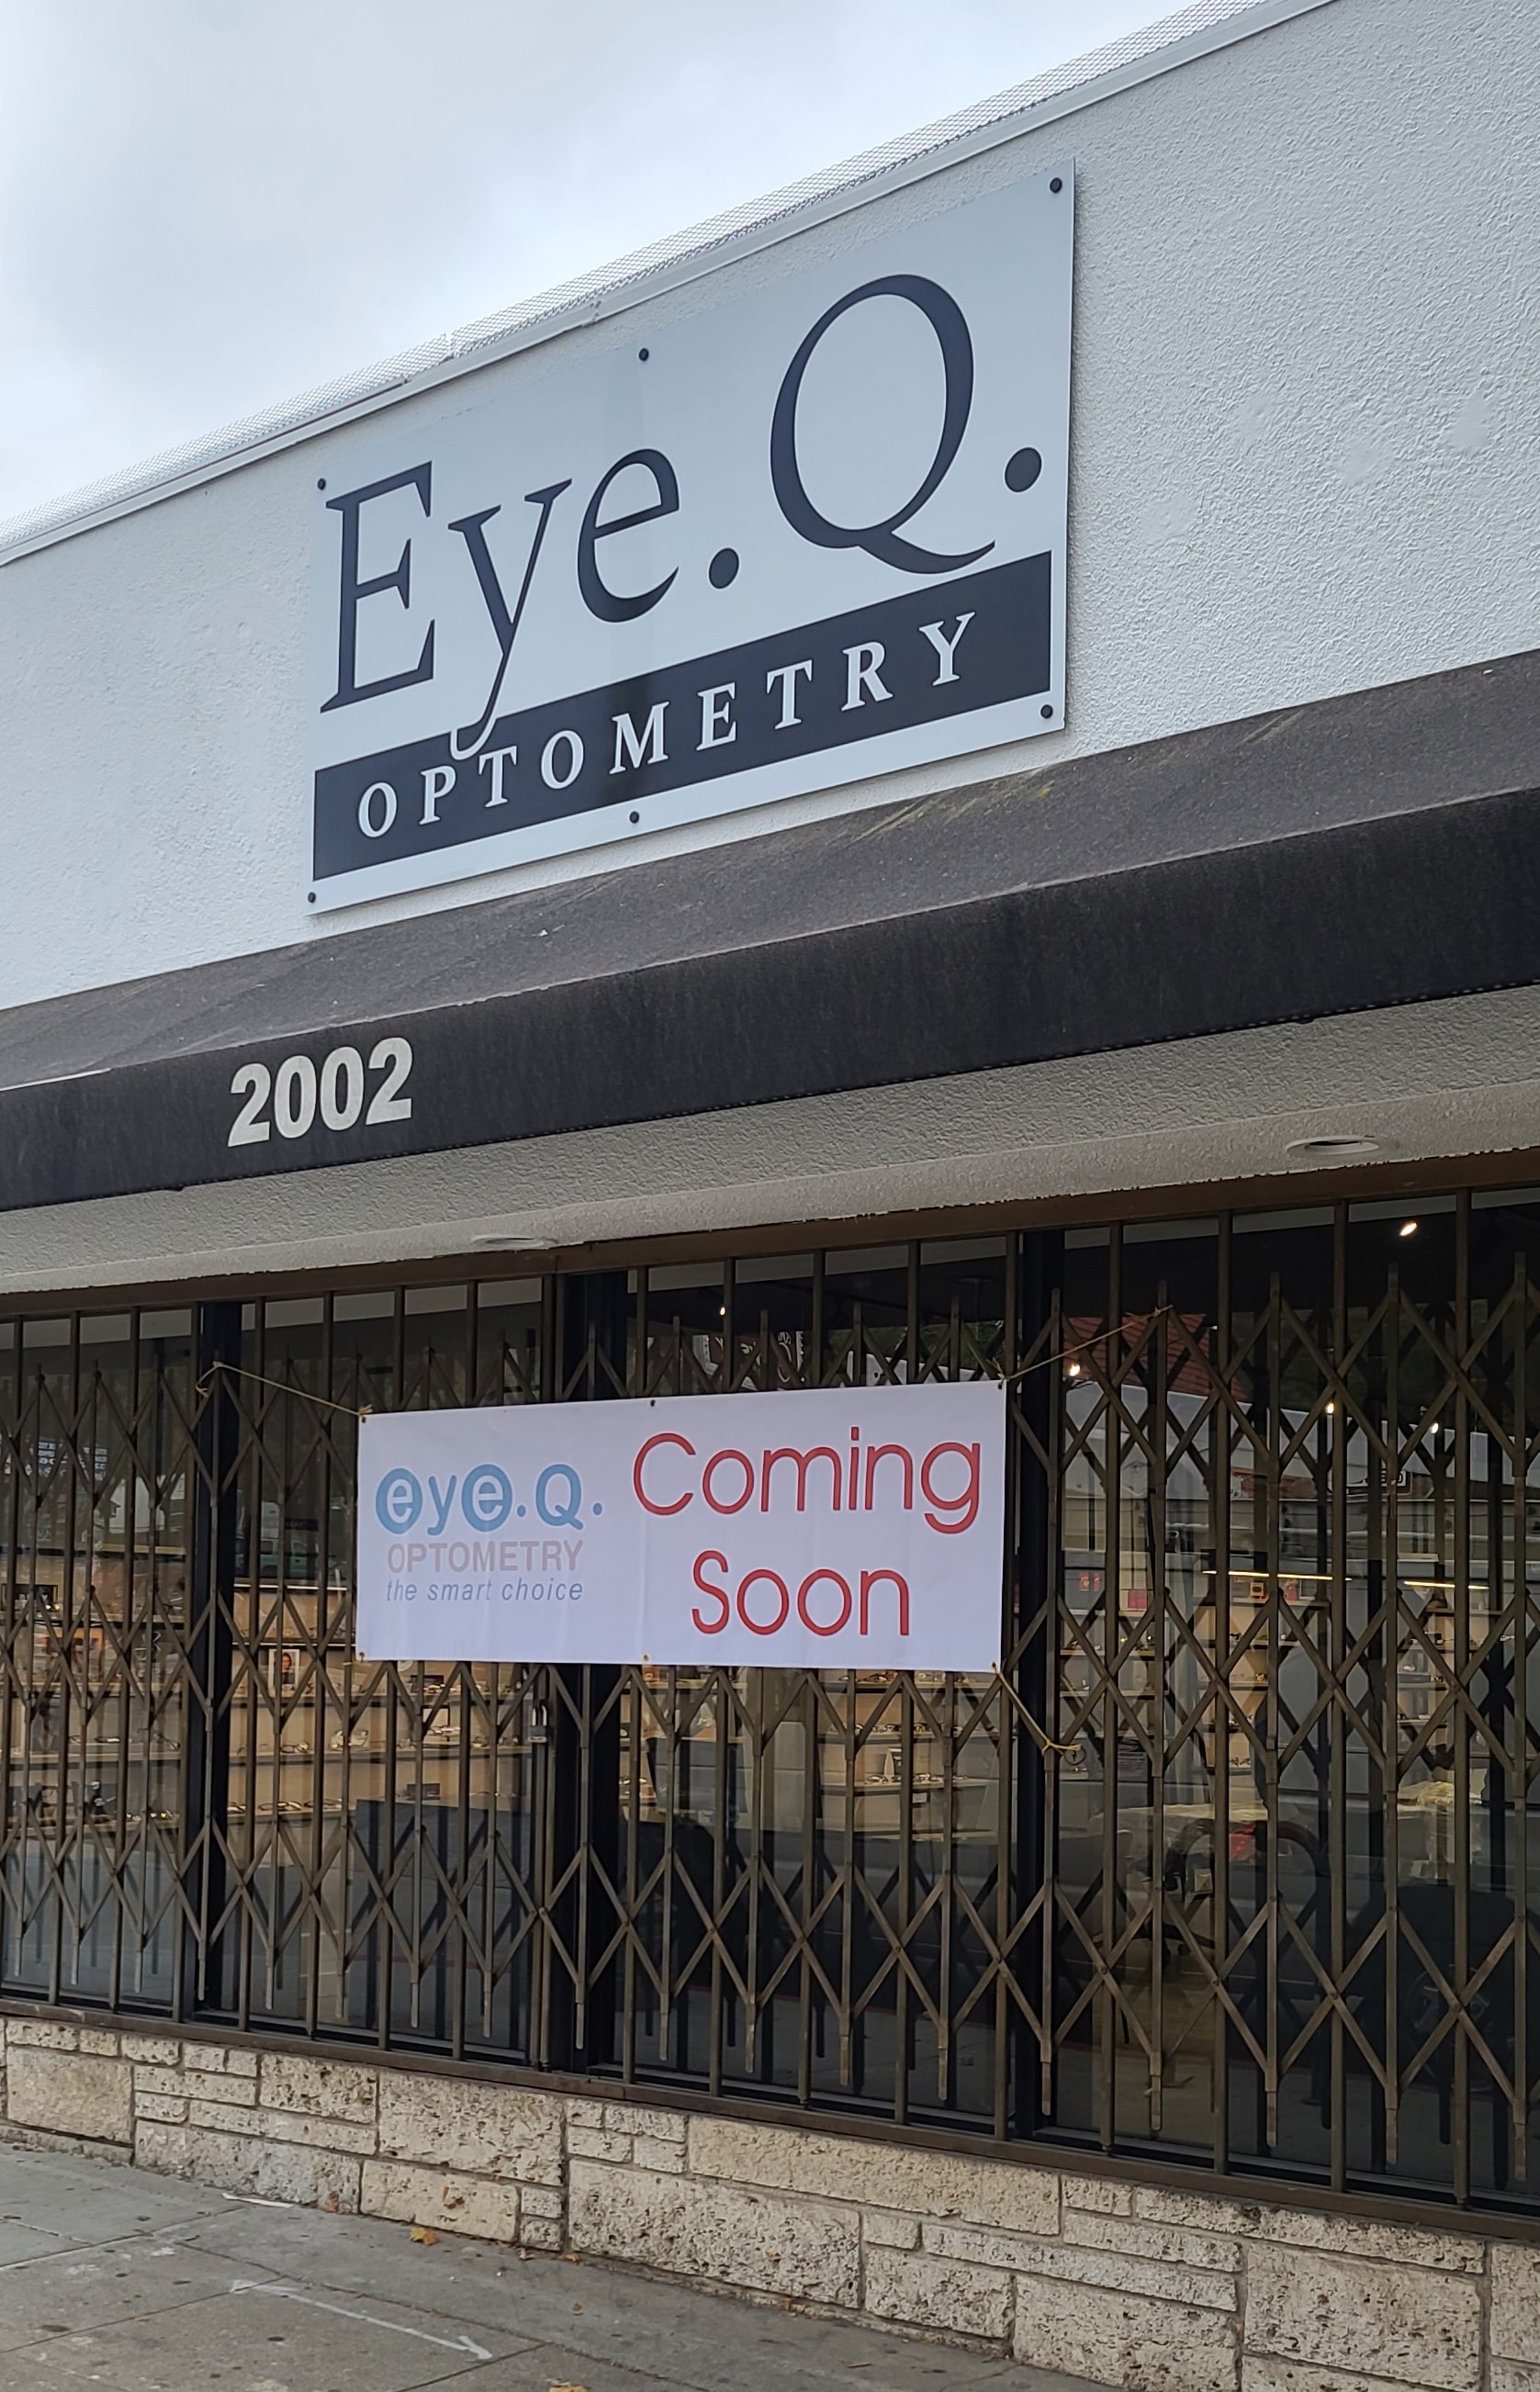 Our hand-painted sign for Eye Q Optometry in Los Angeles. Because nothing can replace the attention to detail that comes with hand-painted designs.